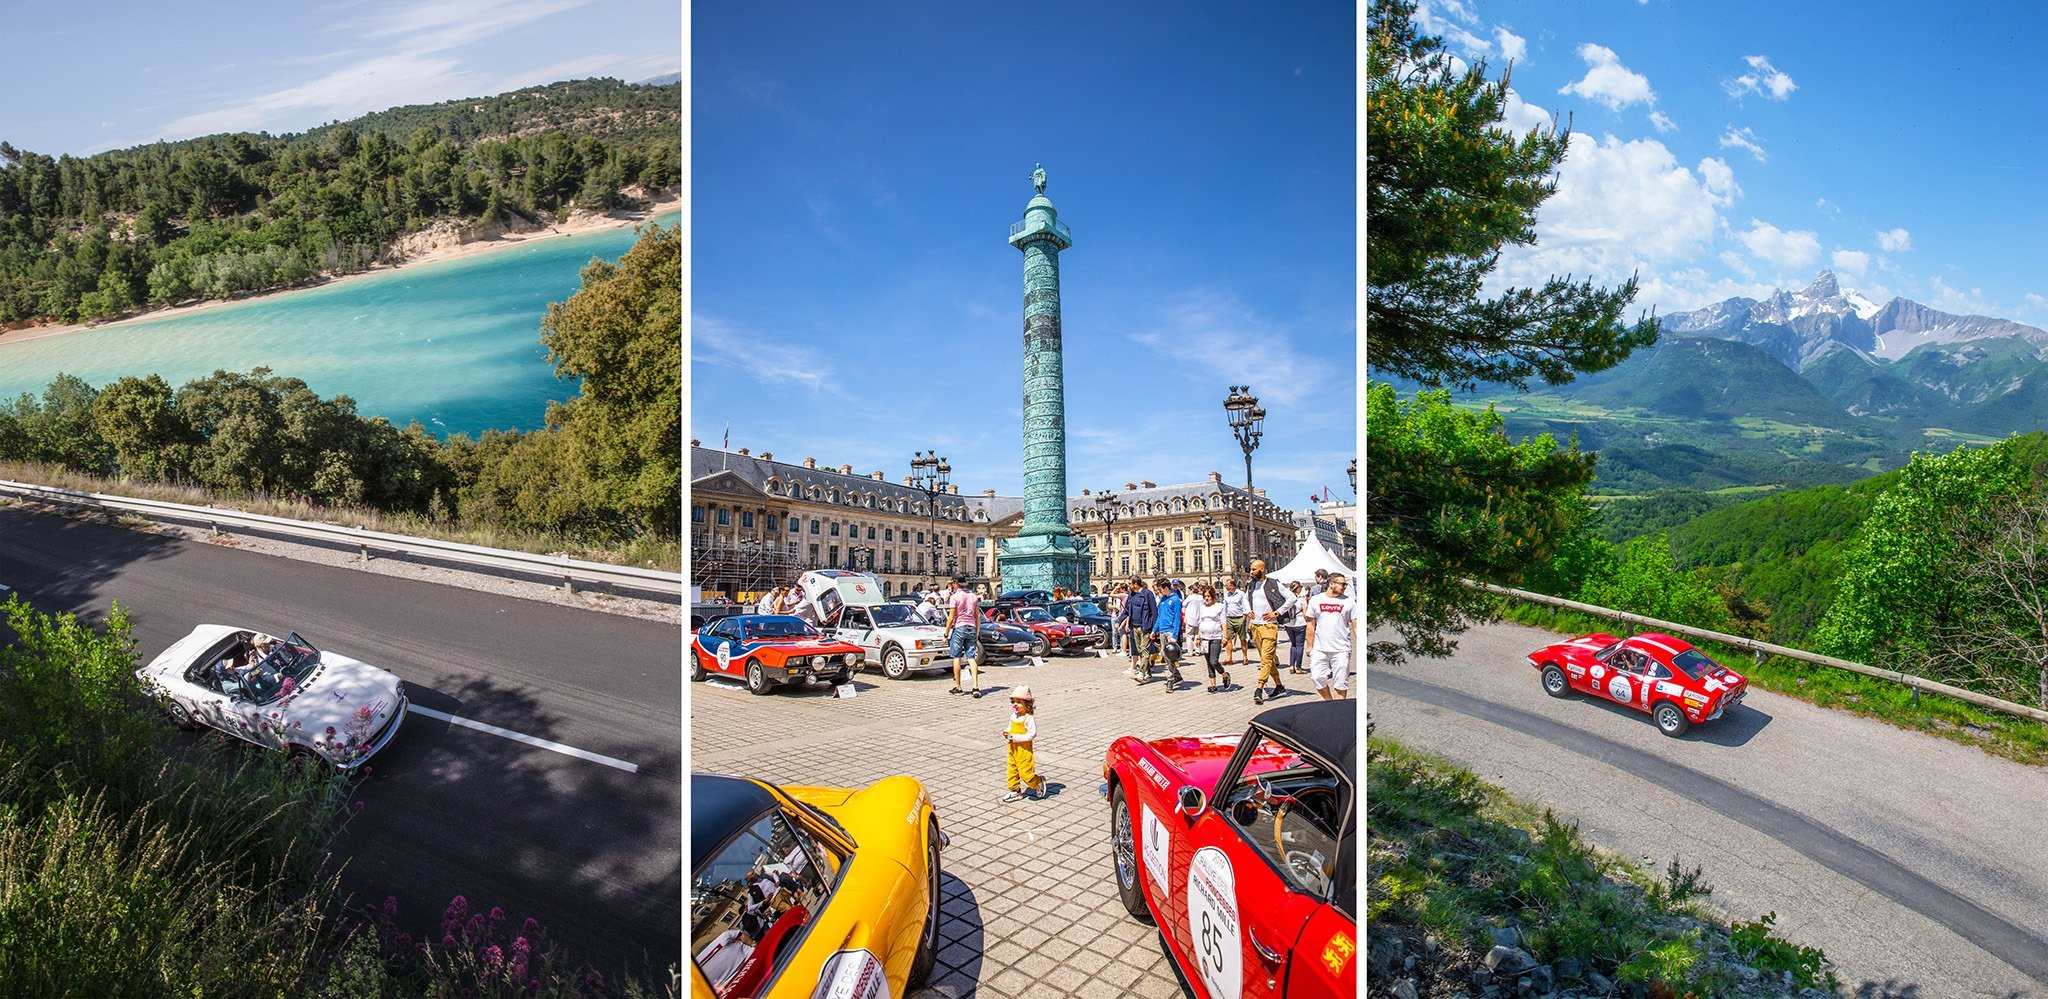 The route took the competitors on a five-day adventure through 1,700 kilometers of French countryside from Place Vendome in Paris to Saint Tropez via overnight halts in Saint Aignan, Vichy, Aix-les-Bains and Saint Tropez.